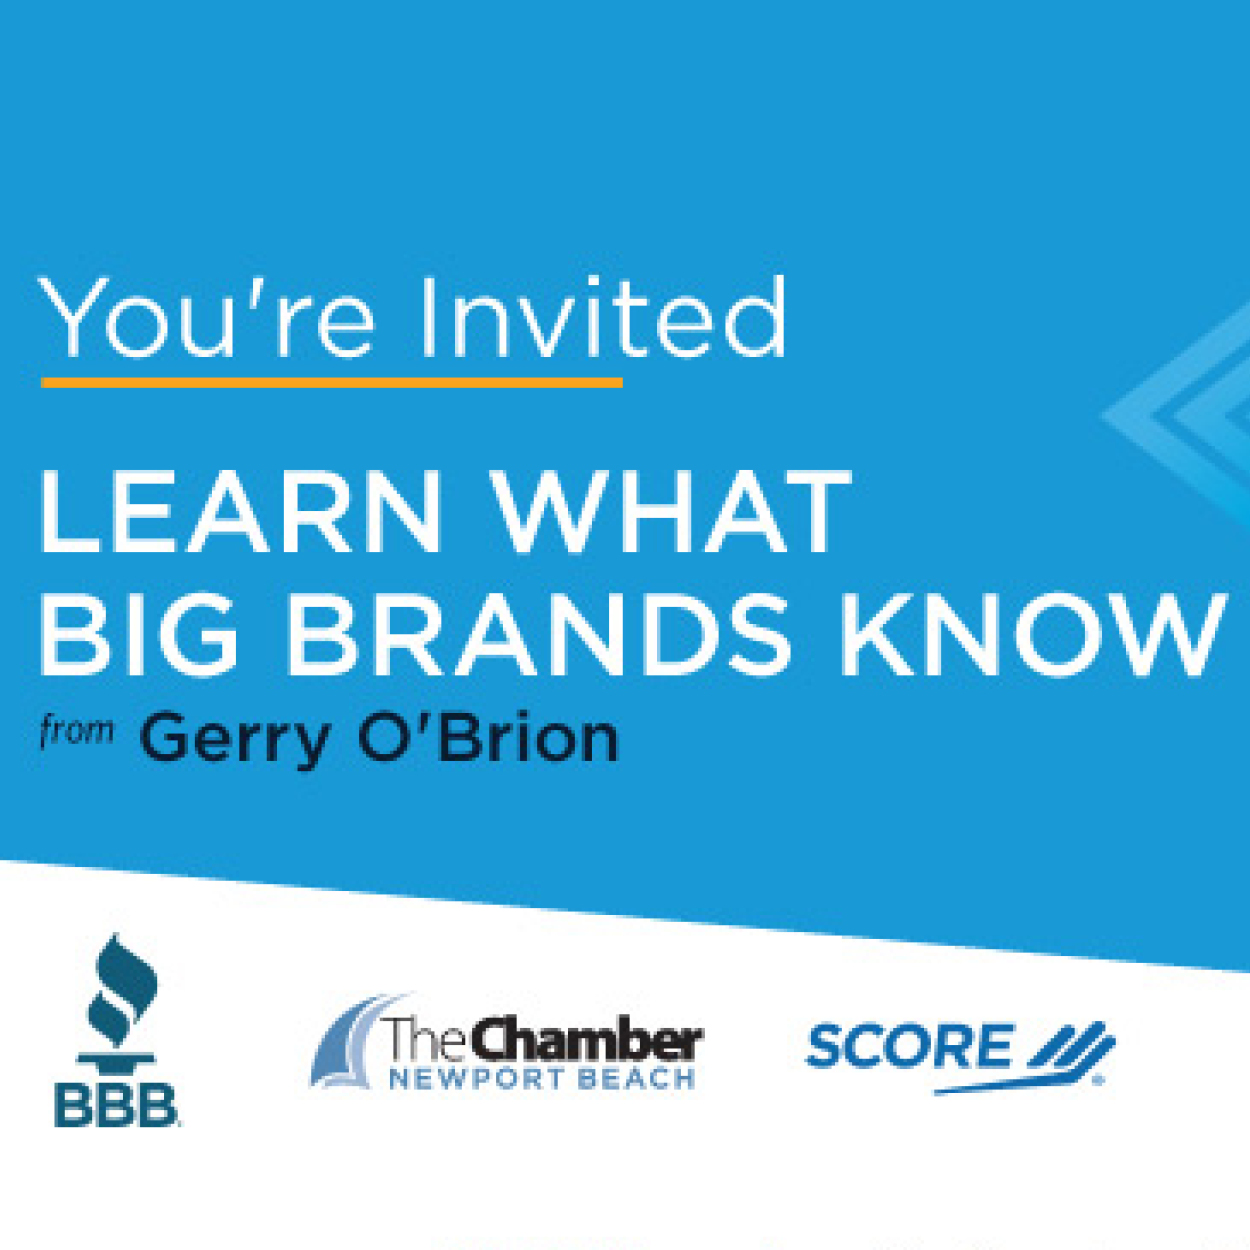 The Chamber, Spectrum Reach, Better Business Bureau & SCORE - FREE breakfast "Learn What the Big brands Know"